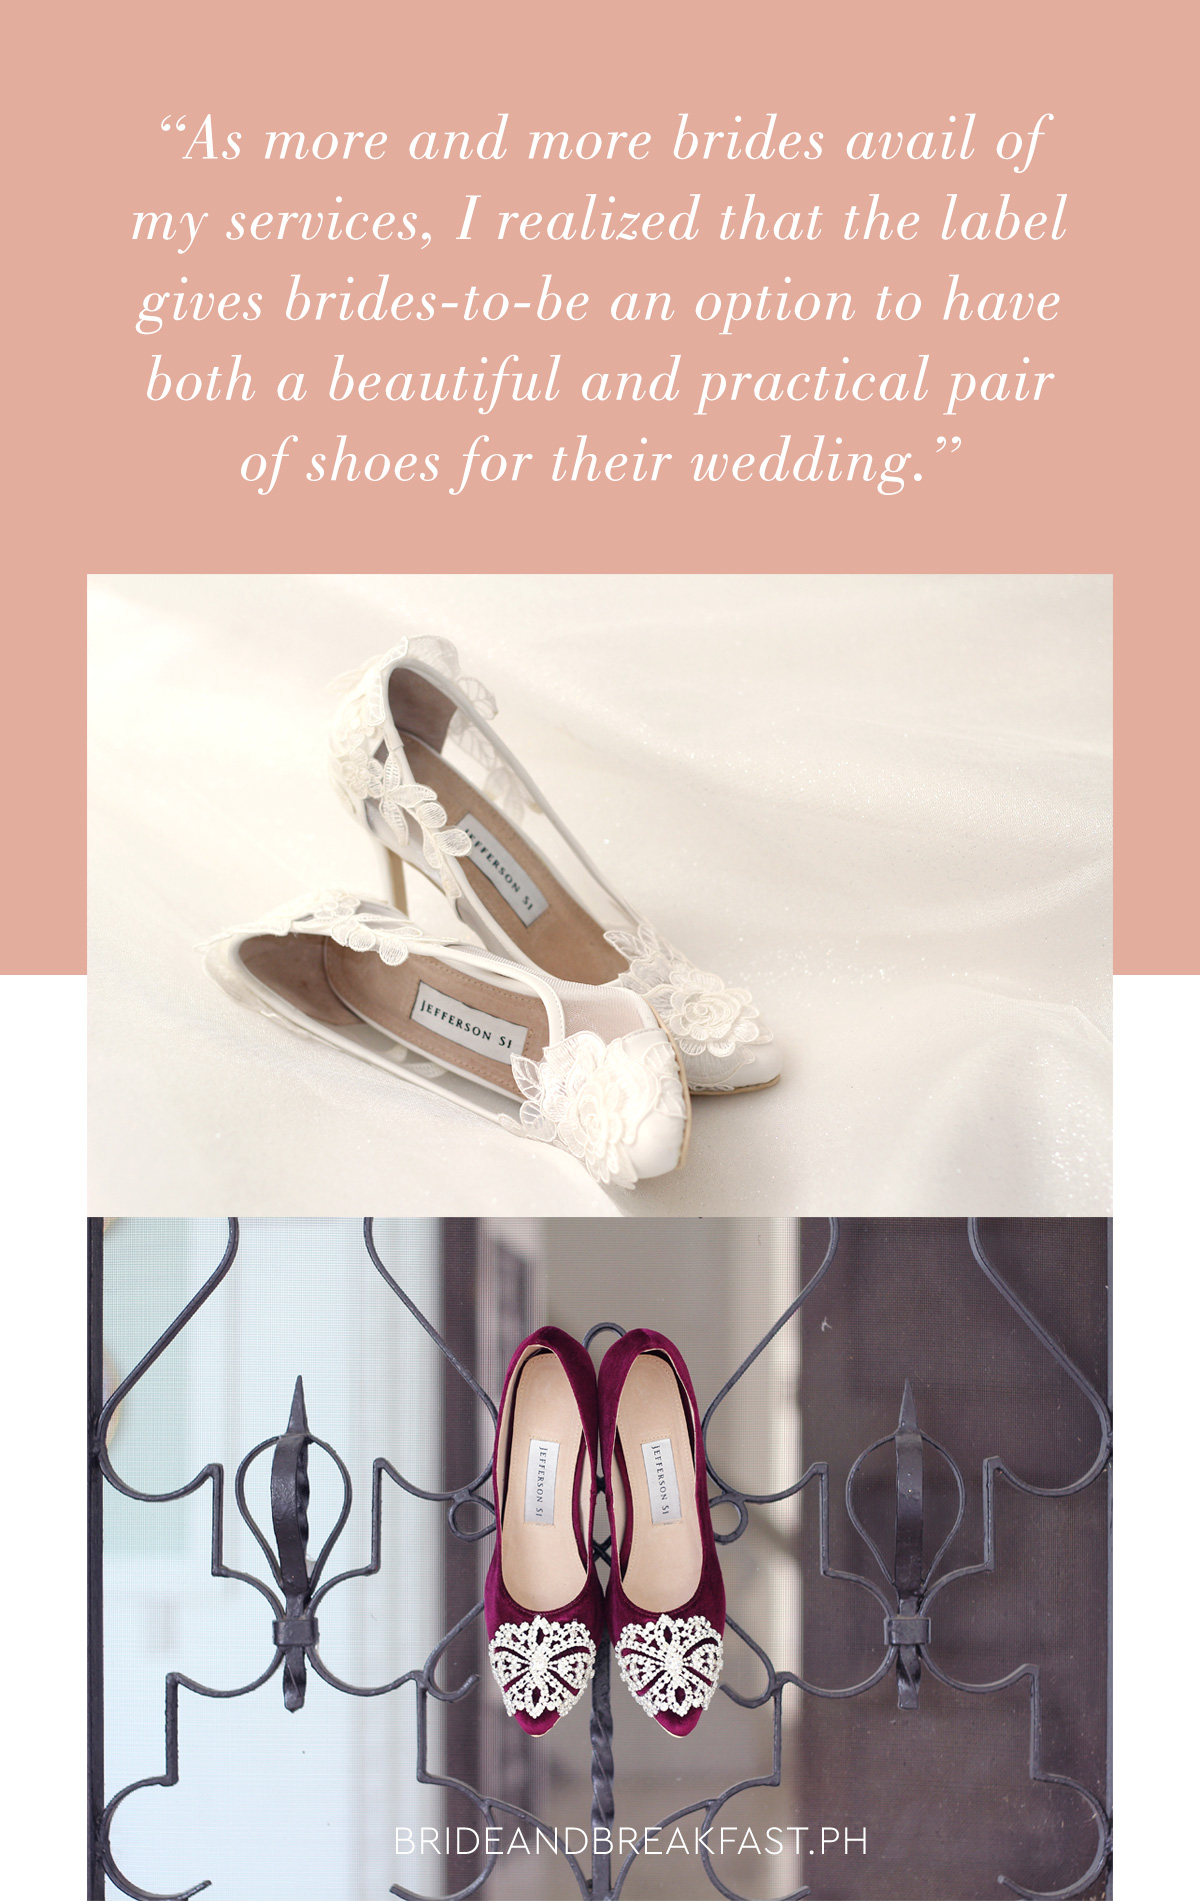 As more and more brides avail of my services, I realized that the label gives brides-to-be an option to have both a beautiful and practical pair of shoes for their wedding.